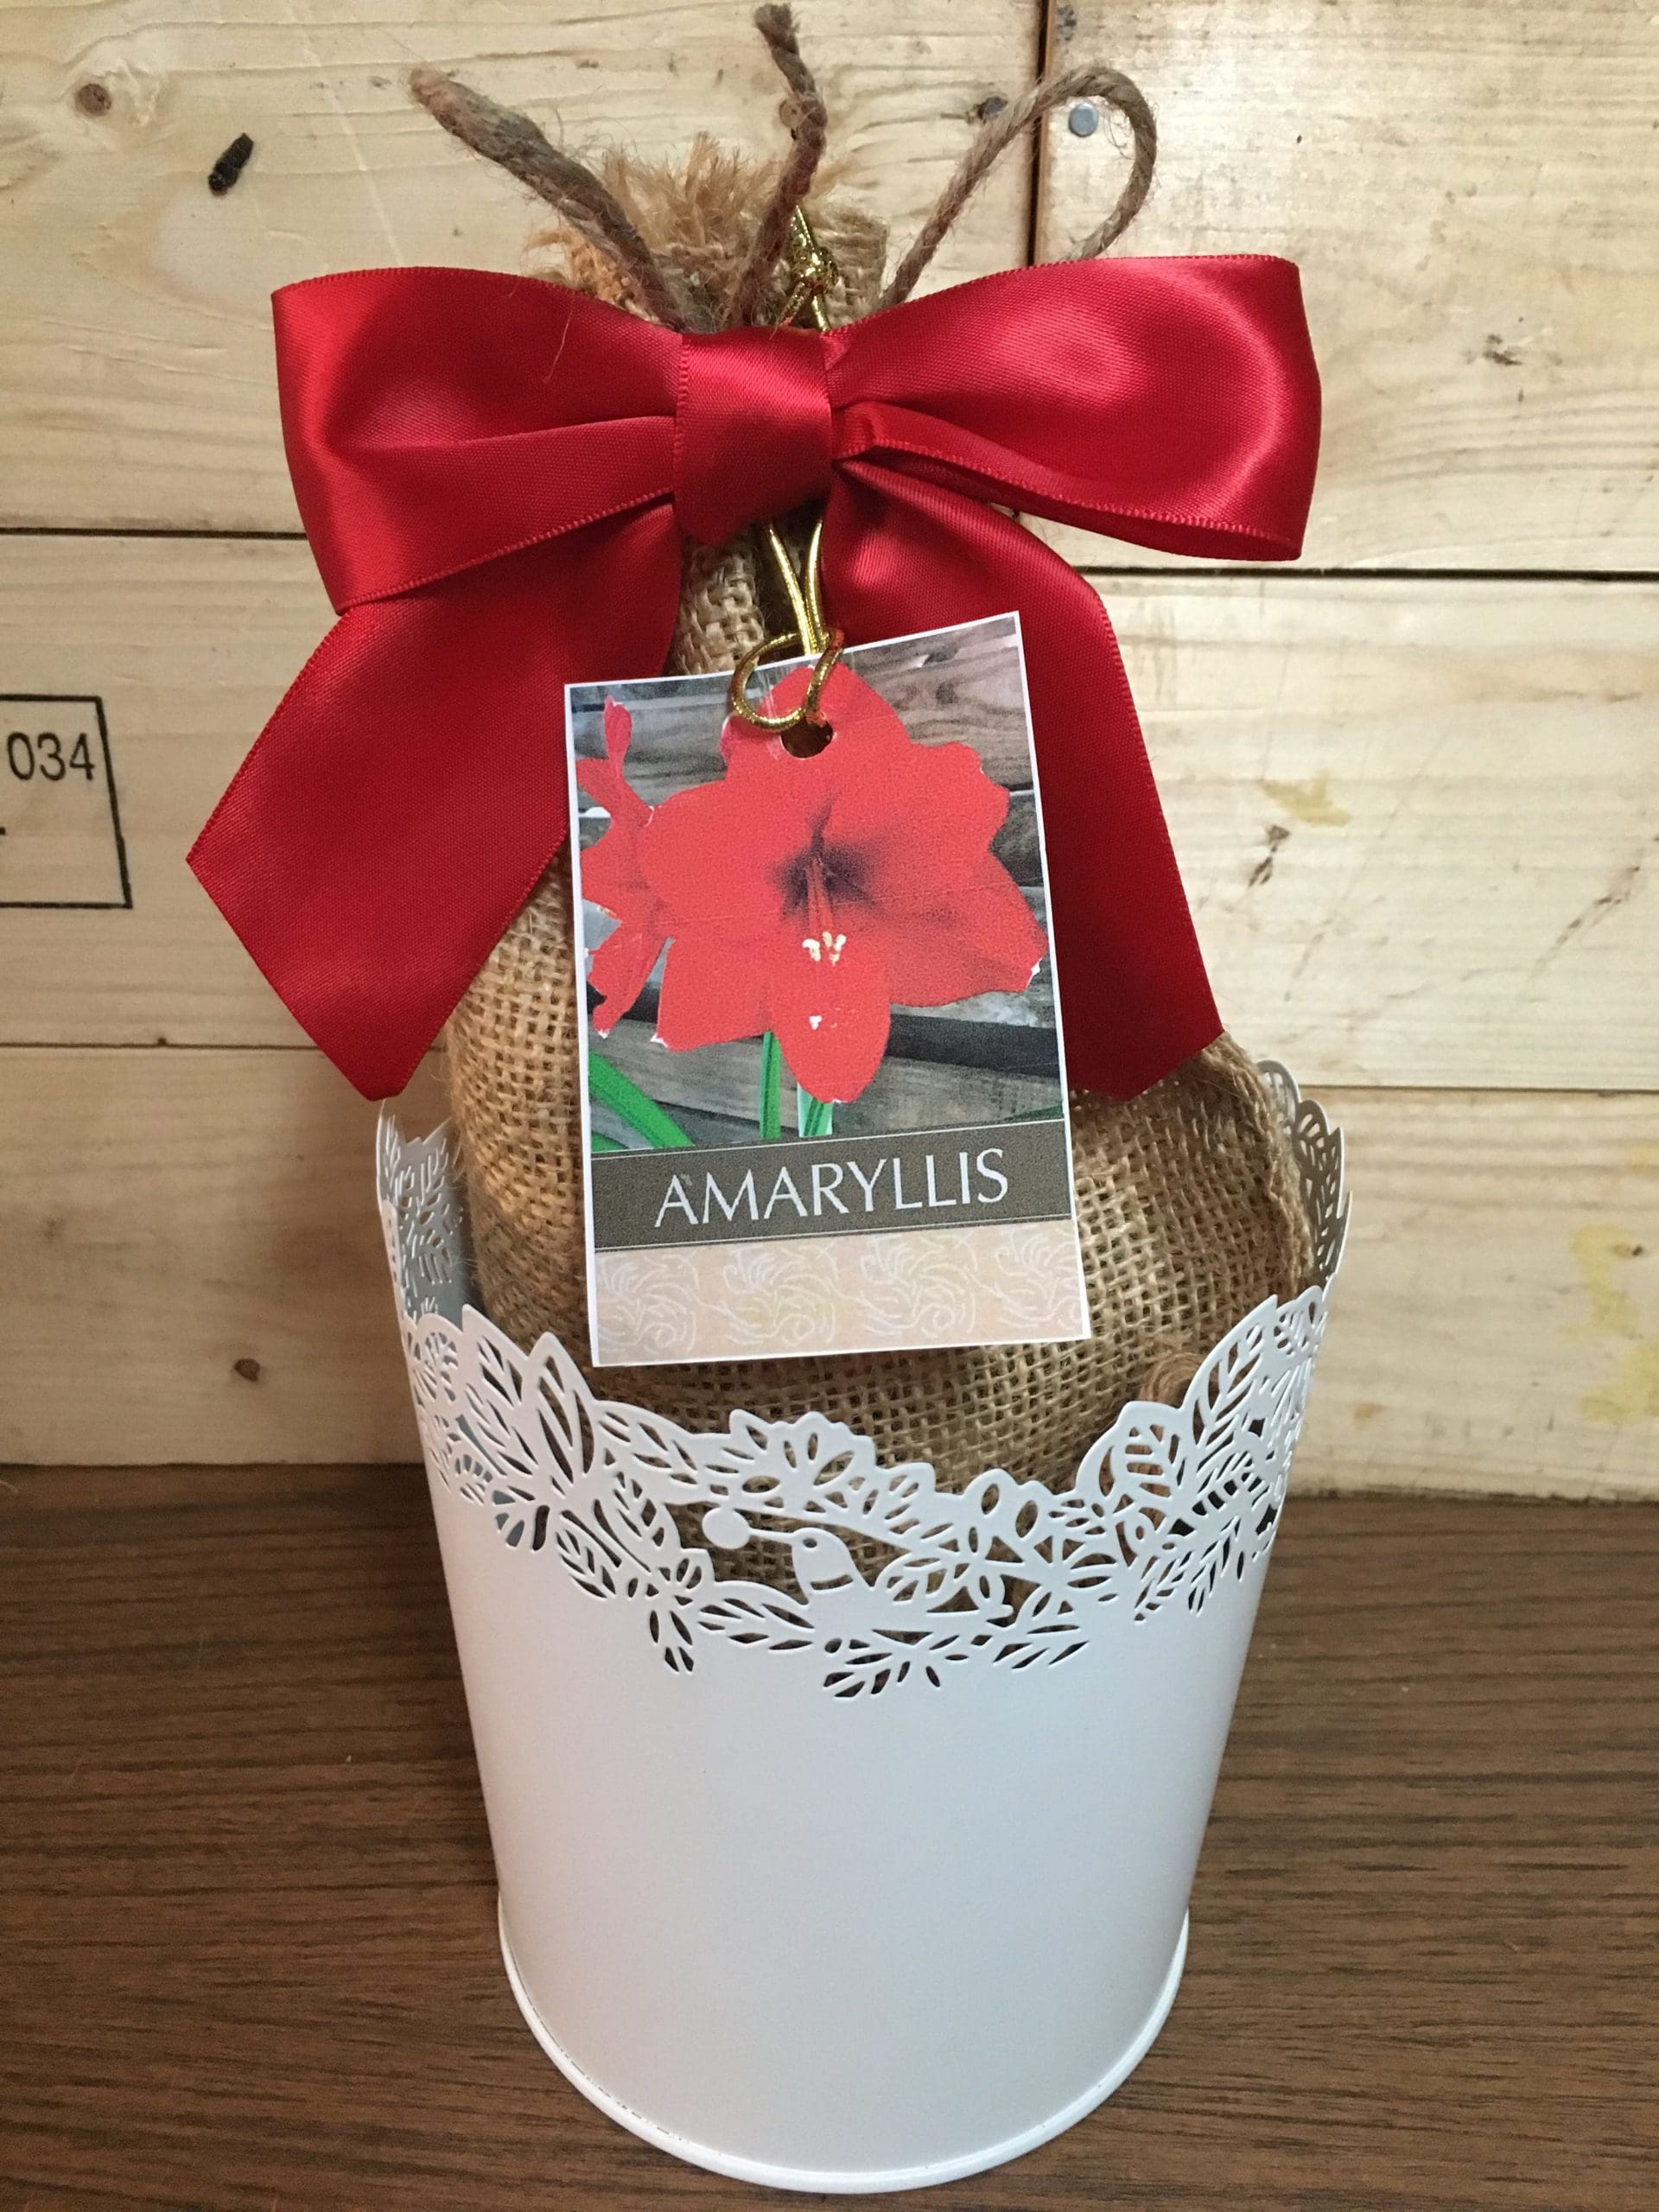 Amaryllis grow kit from our online nursery, an online plant nursery for amaryllis grow kits, tulip bulb mix, paperwhite bulb mix, fast growing trees and much more!